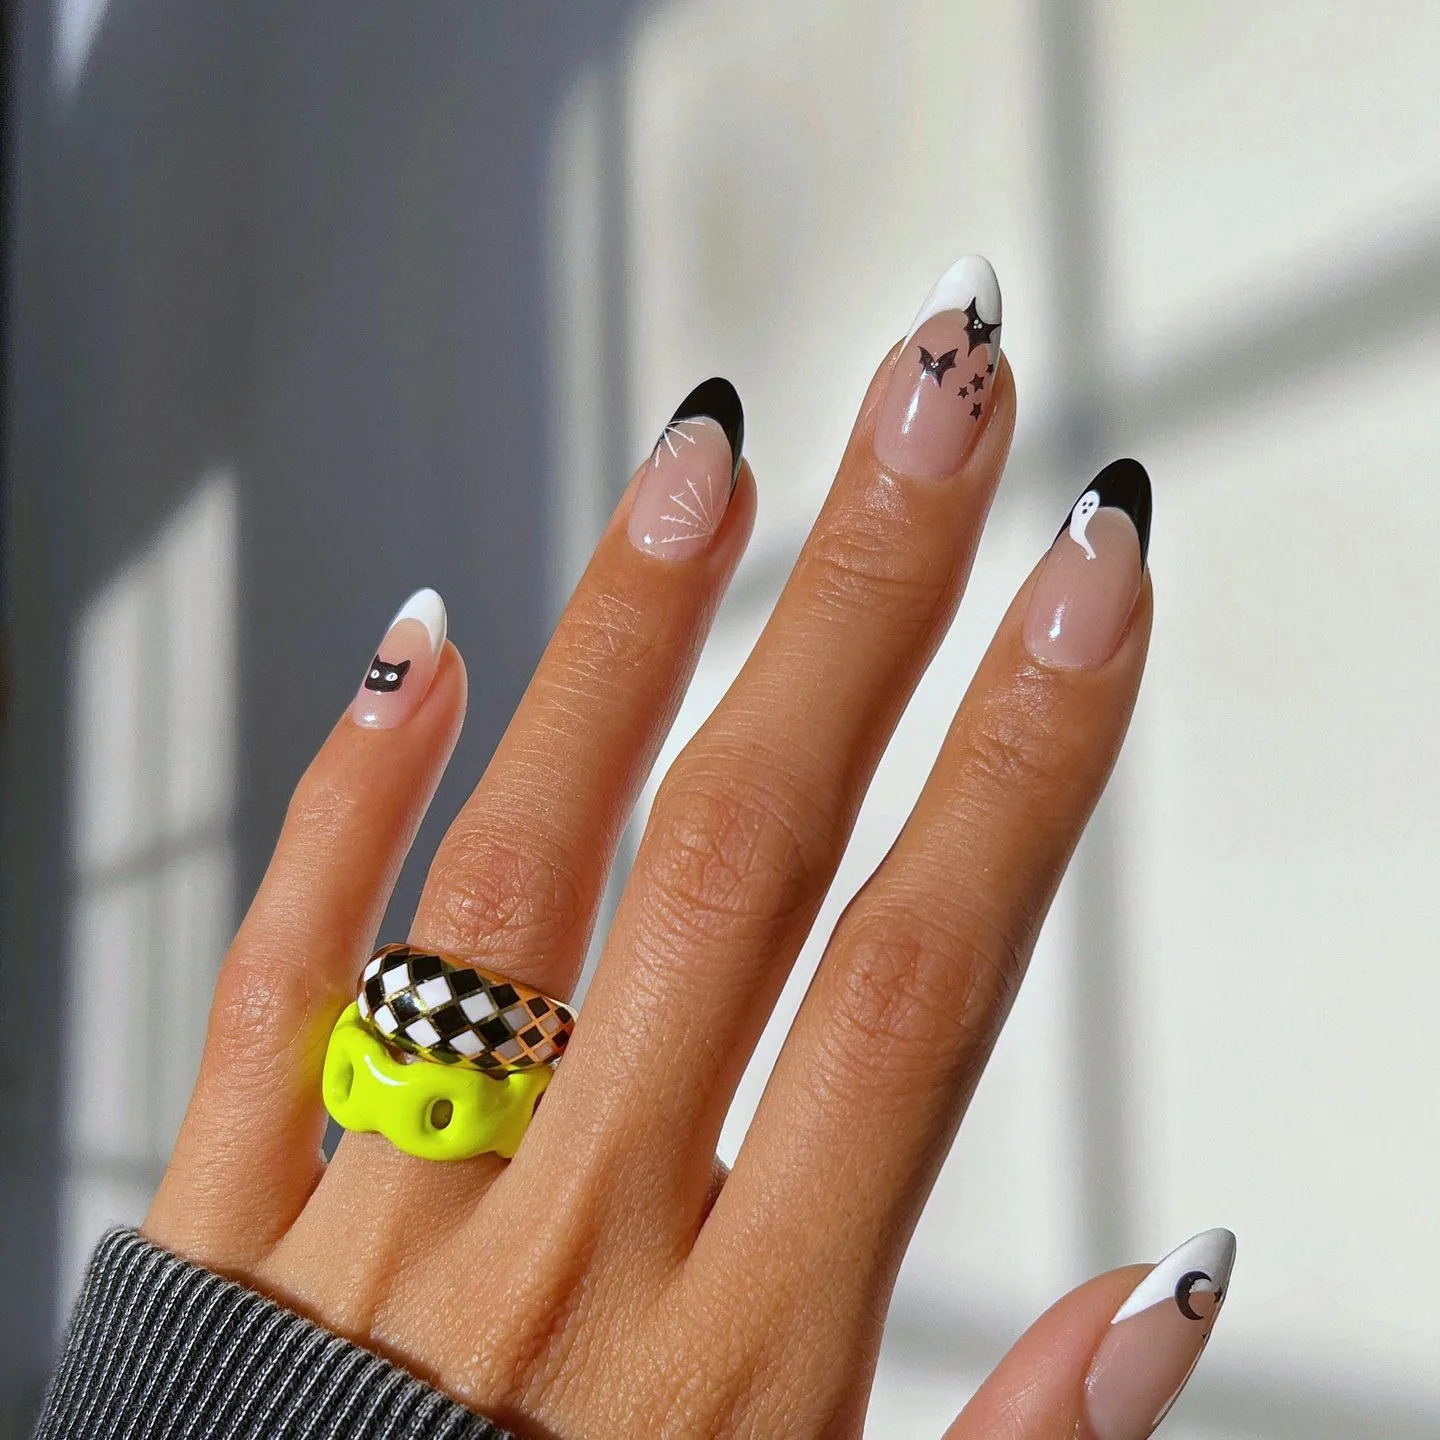 Cute French Tip Halloween Nails